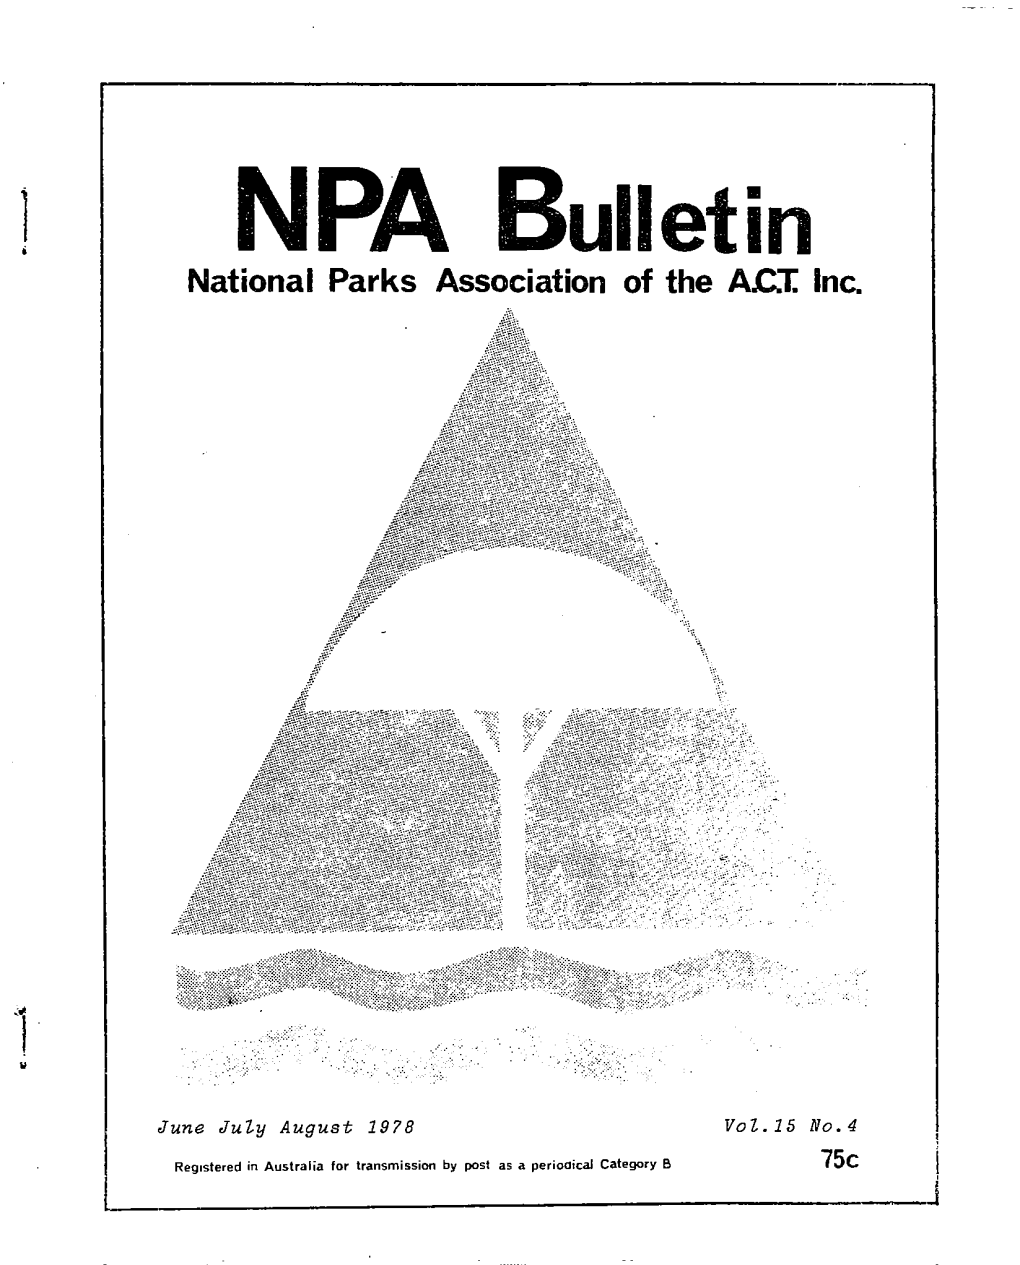 National Parks Association of the AJCX